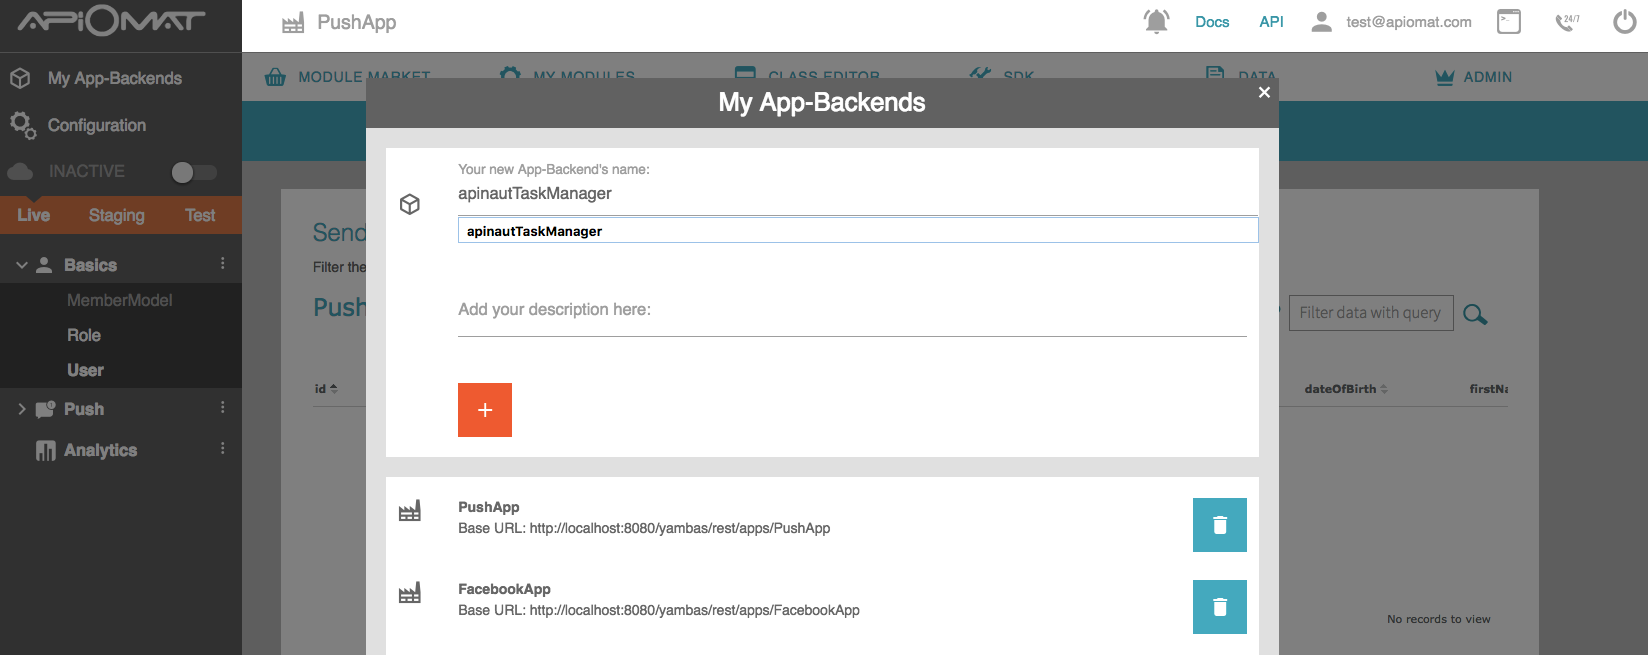 images/download/attachments/88096955/taskManager_newBackend.png